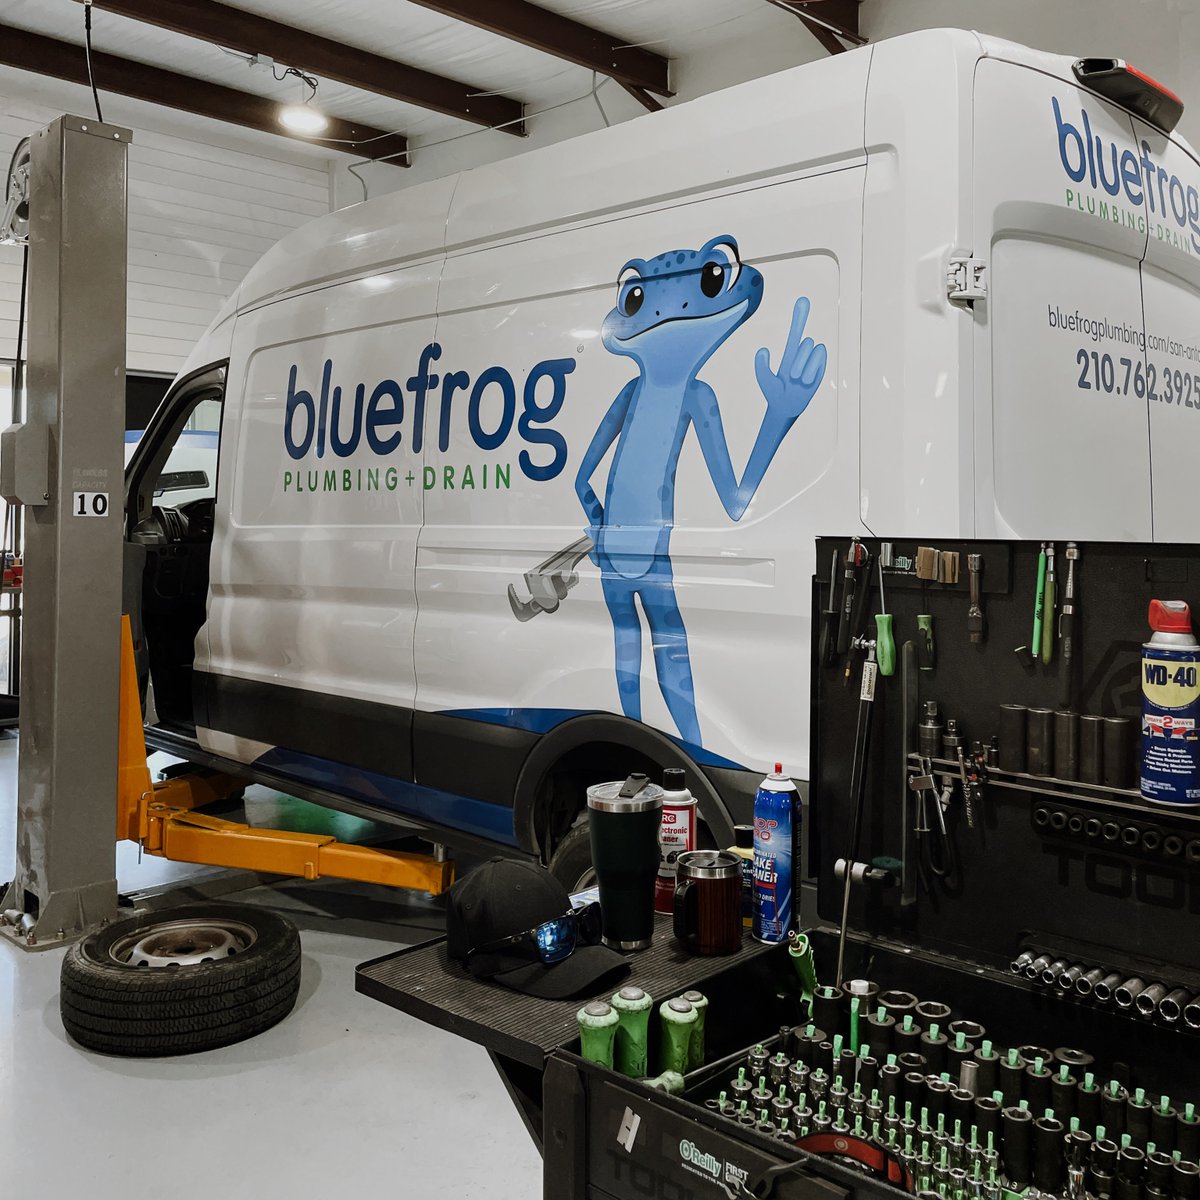 At Fifth Gear Automotive, we're not just fixing cars, we're fueling the engines of other businesses like Blue Frogs Plumbing, ensuring their fleet stays reliable and ready to roll. Because when they're in gear, so are we!

#FifthGearAuto #AutoRepair #AutoMaintenance